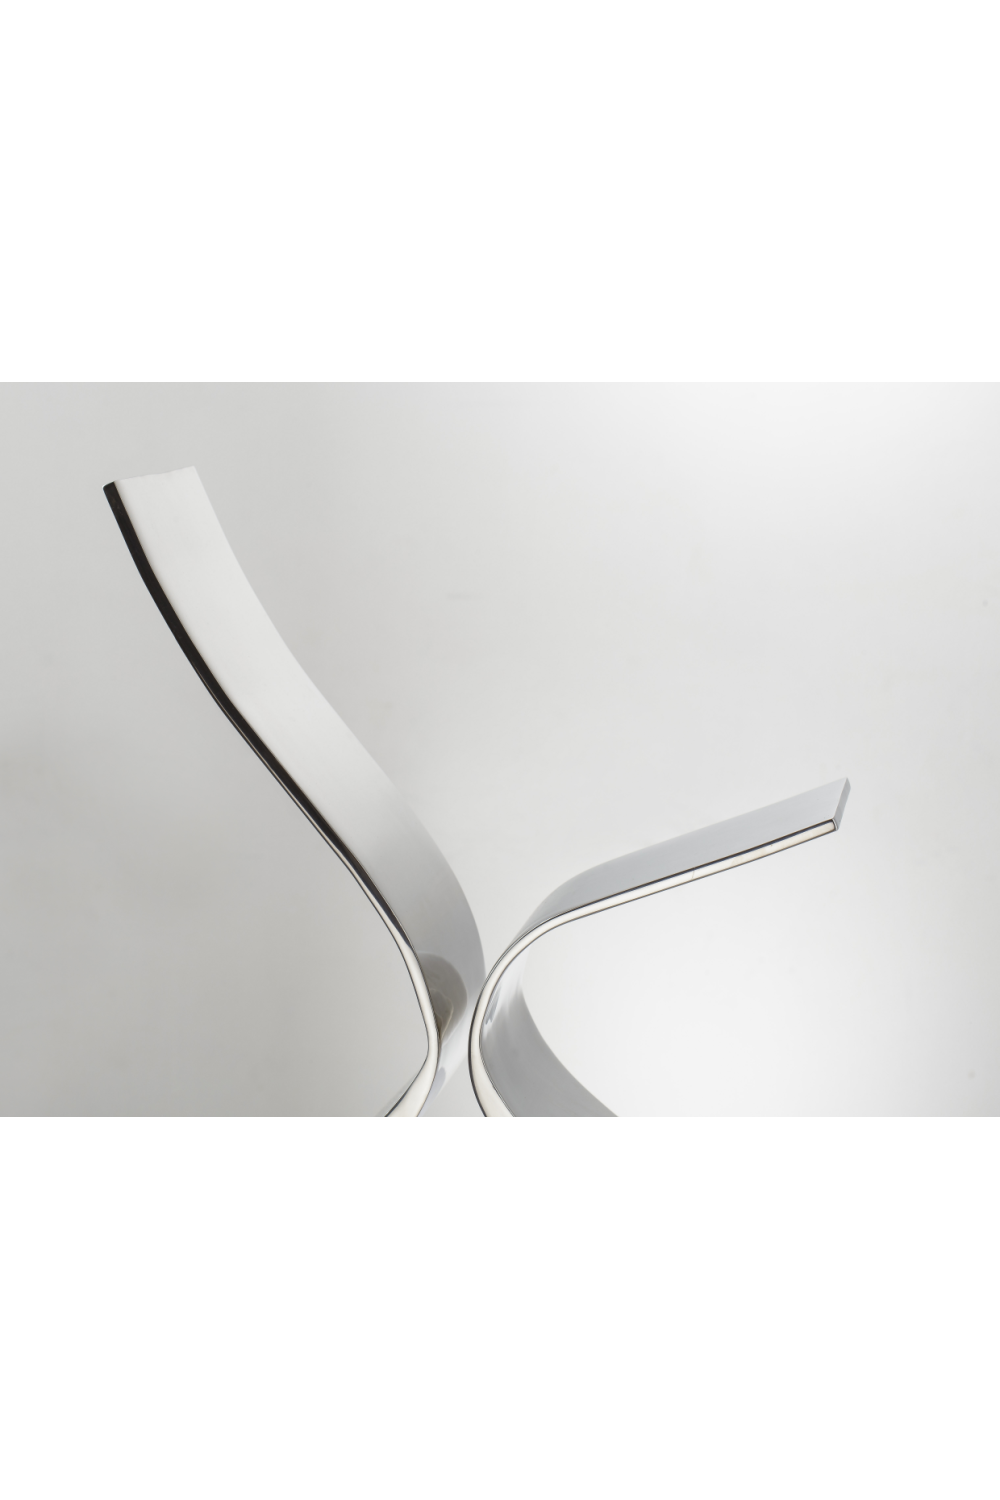 Stainless Steel Curved Desk Lamp | Andrew Martin Ray | OROA